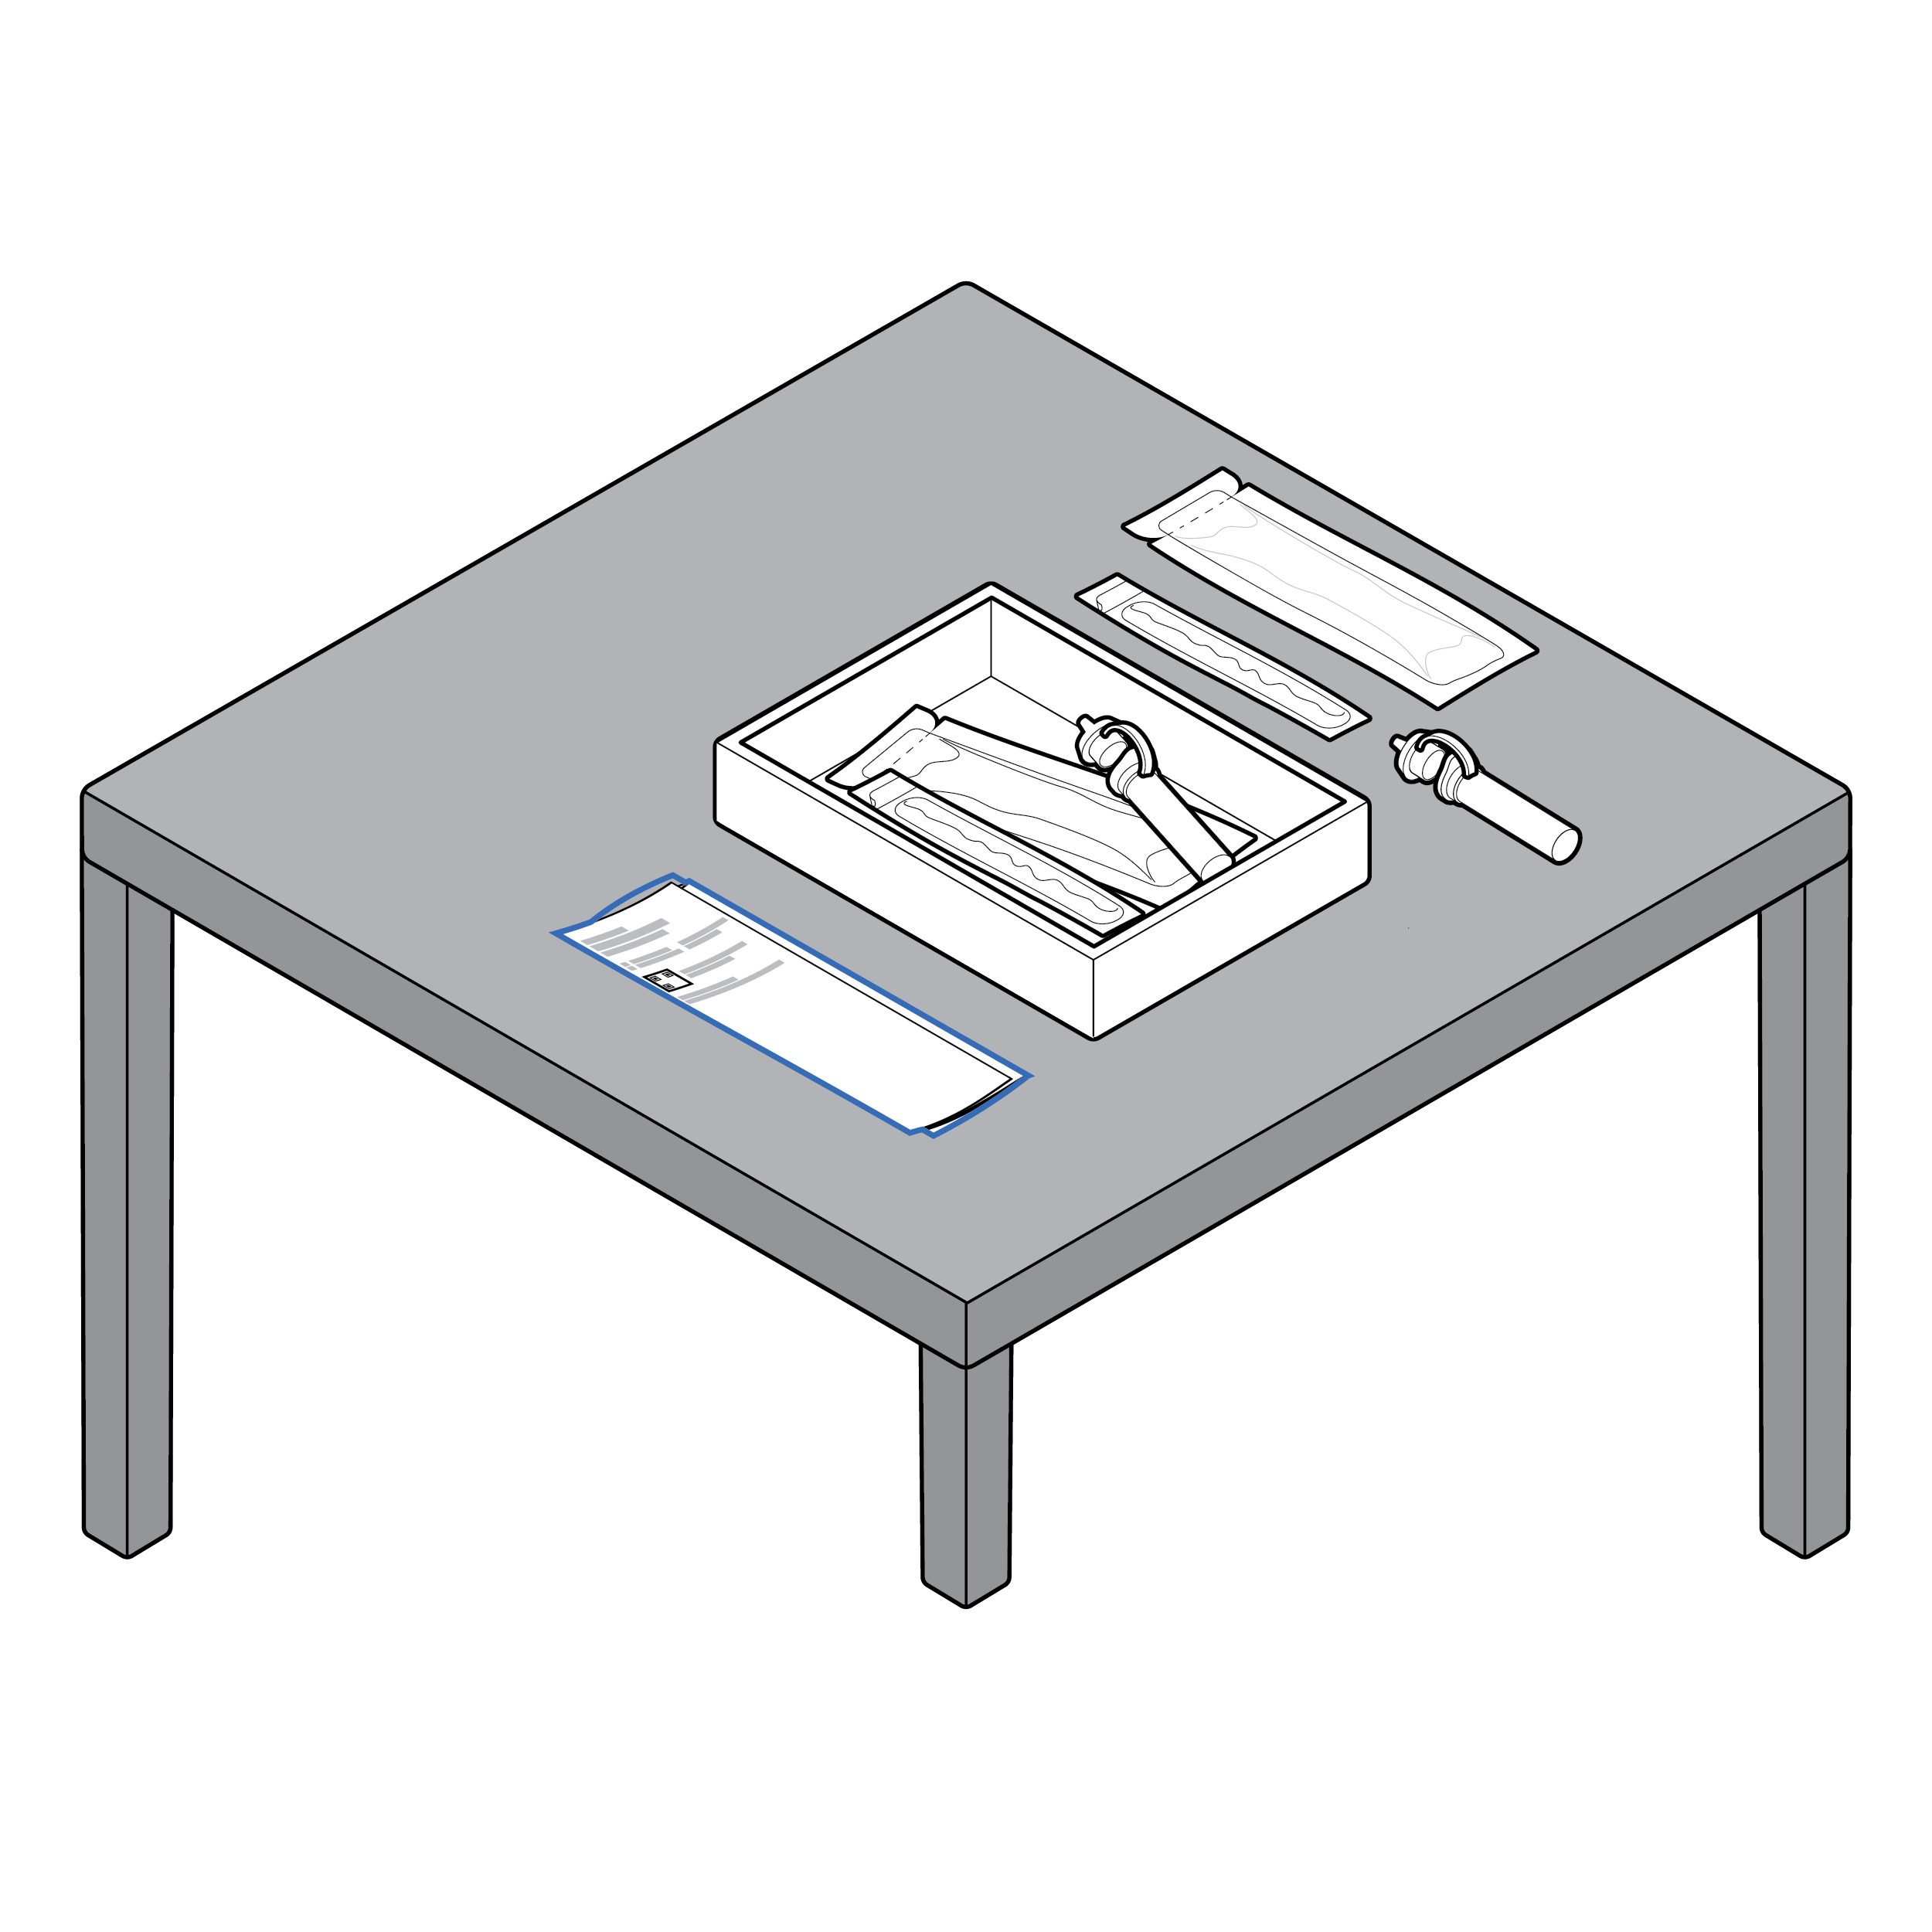 A test kit and folded set of instructions lie on a tabletop. The instructions fit on the tabletop and are usable while folded.